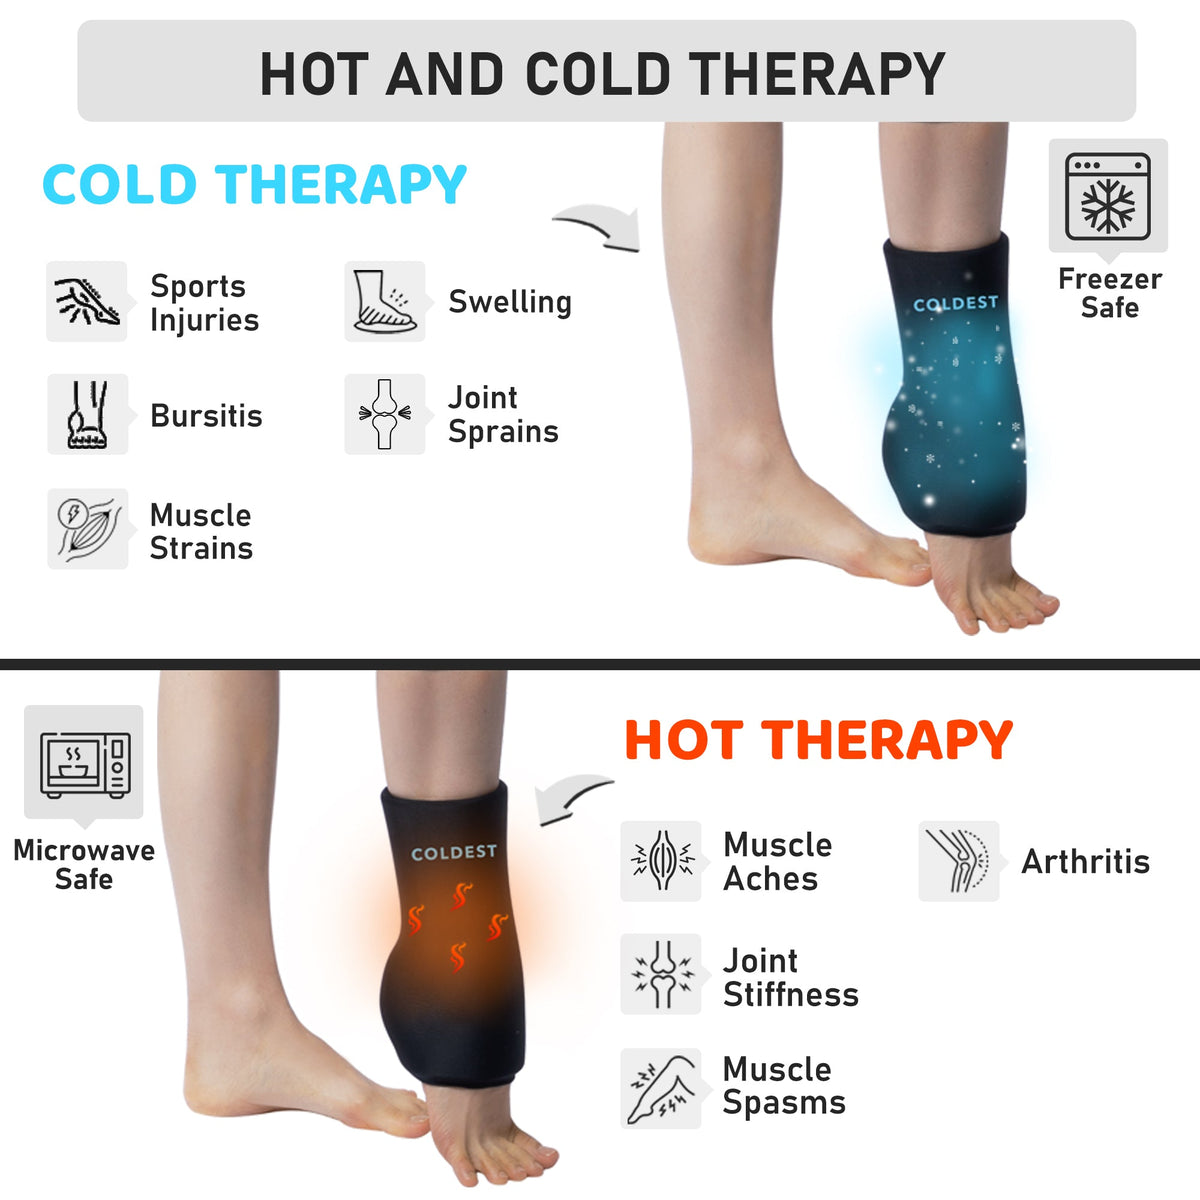 Ankle + Foot 360° Ice Pack Sleeve - Coldest